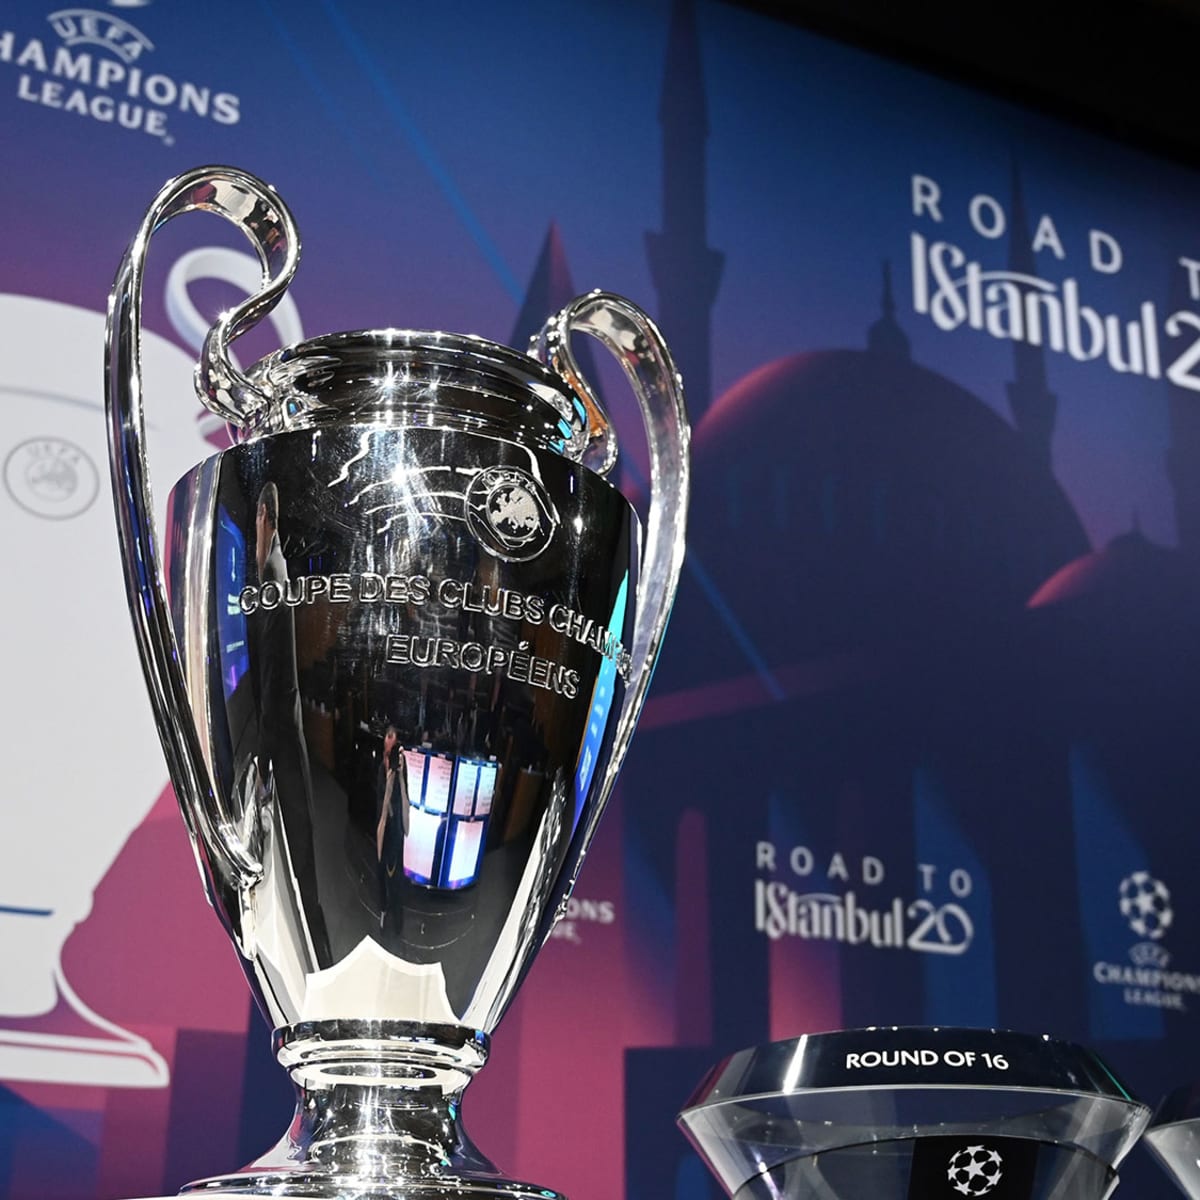 UEFA to pick host for 2021 Champions League Final